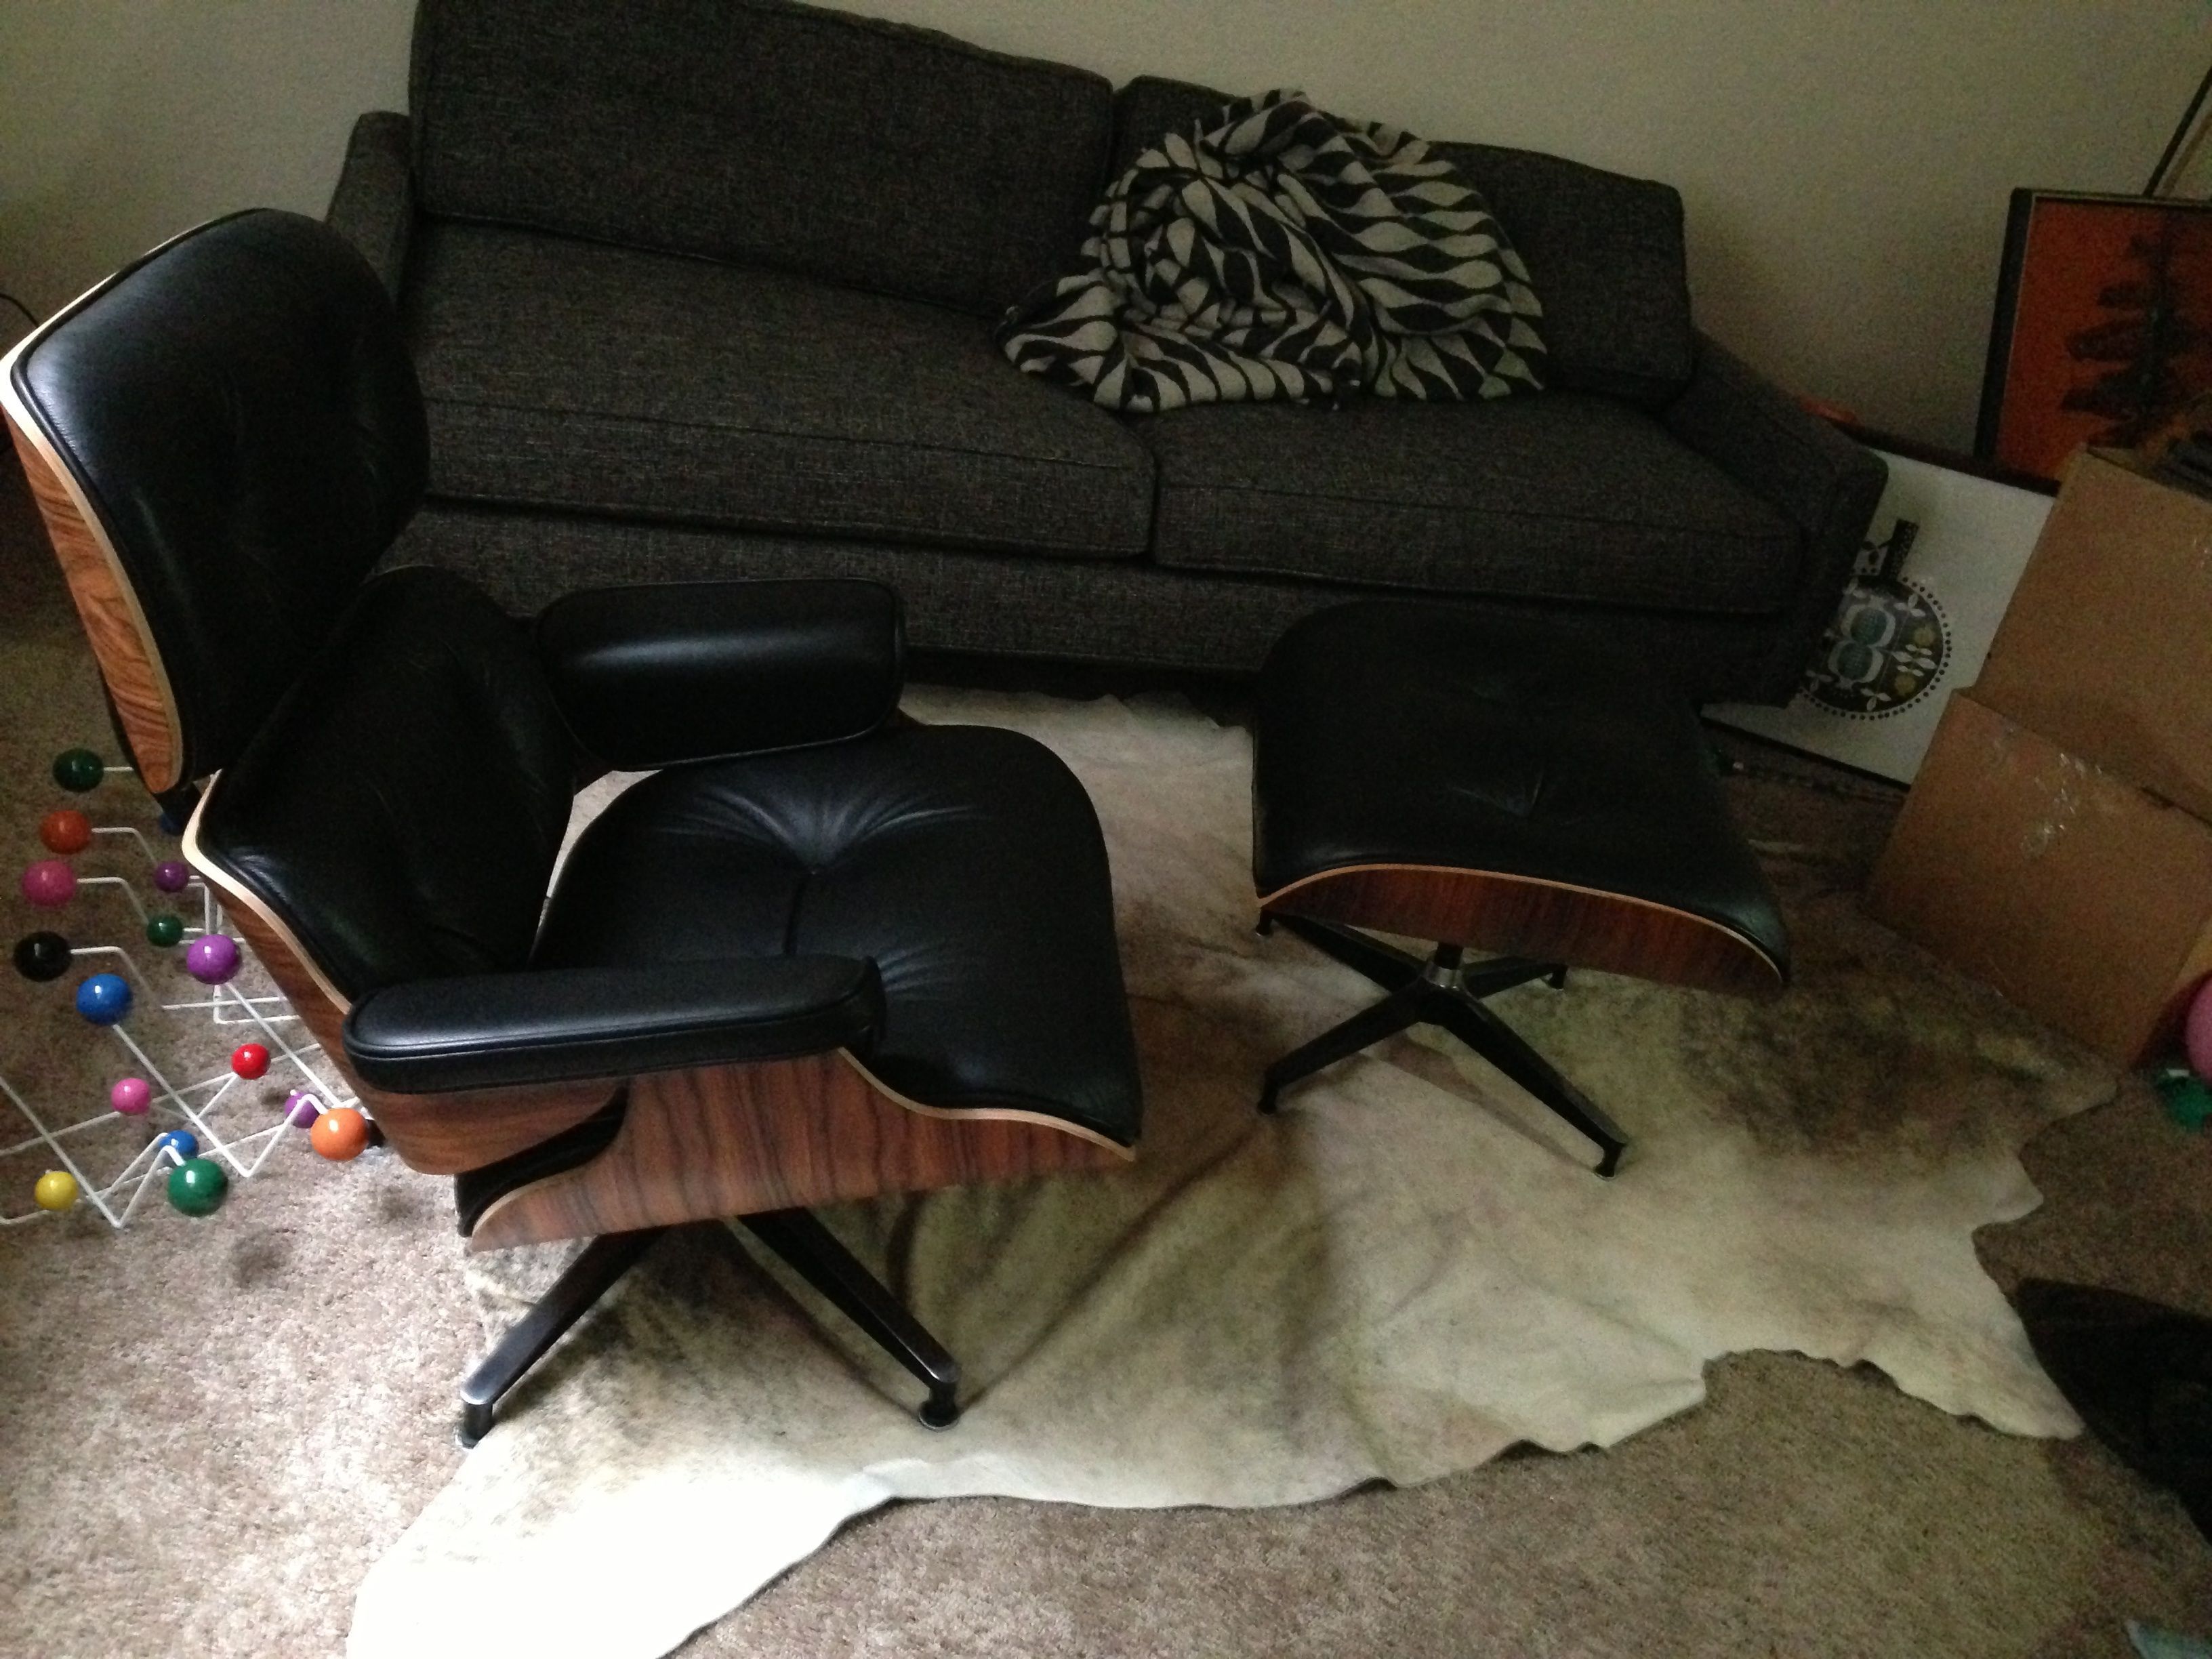 Eames Lounge Chair copies... worth it? | Page 23 | Styleforum